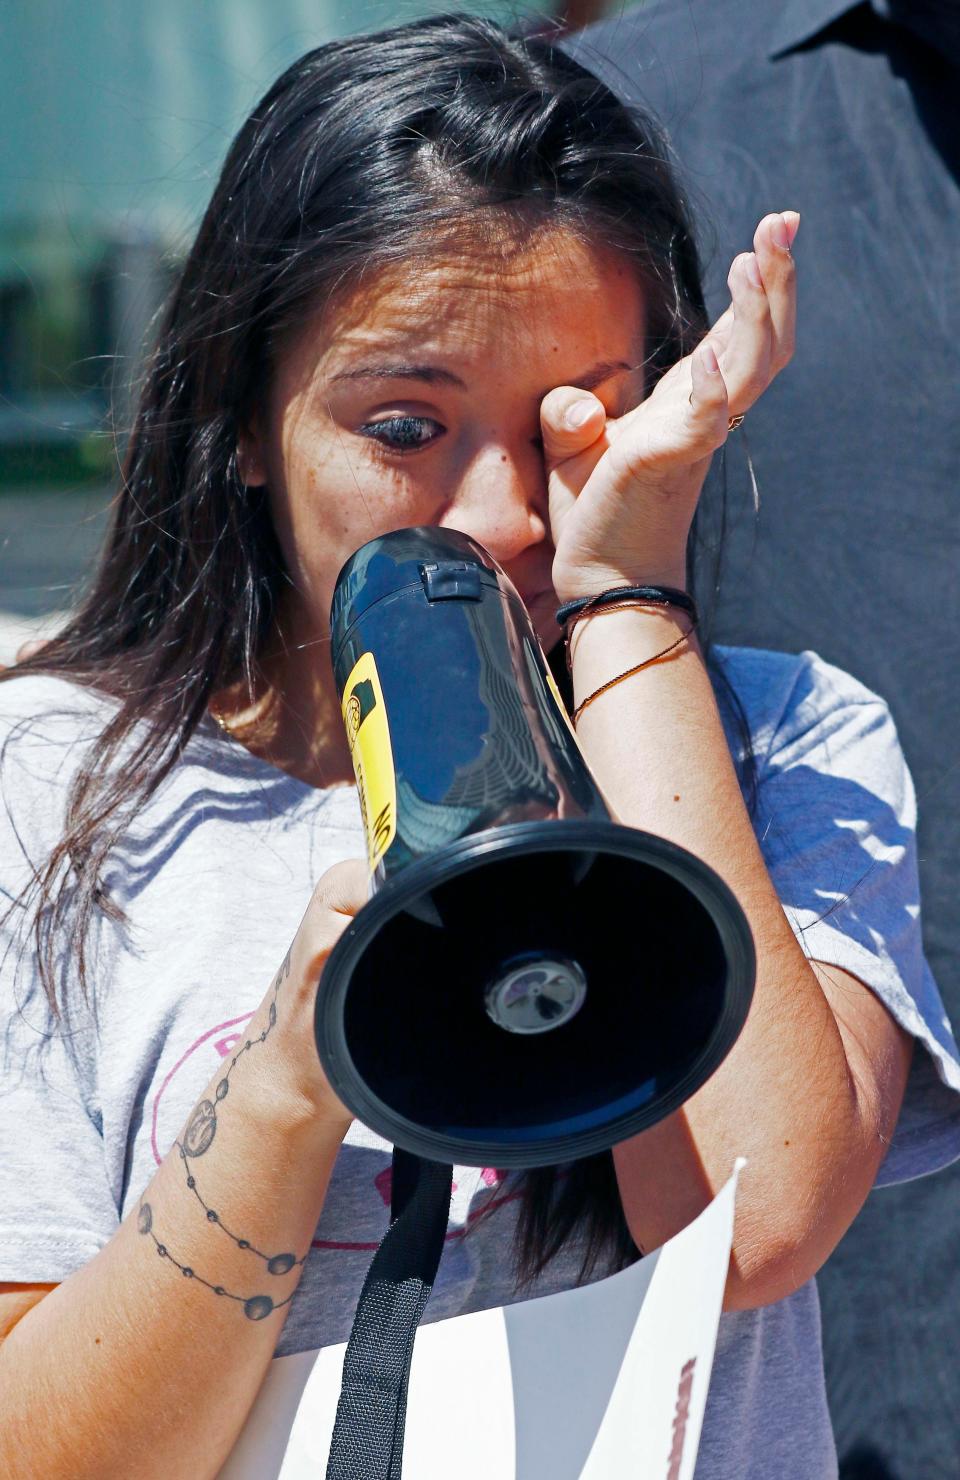 Brenda Ramirez, 18, cries as she speaks in 2017 during a protest outside the federal building in Jackson, Miss., about the opportunities she receives via the DACA program